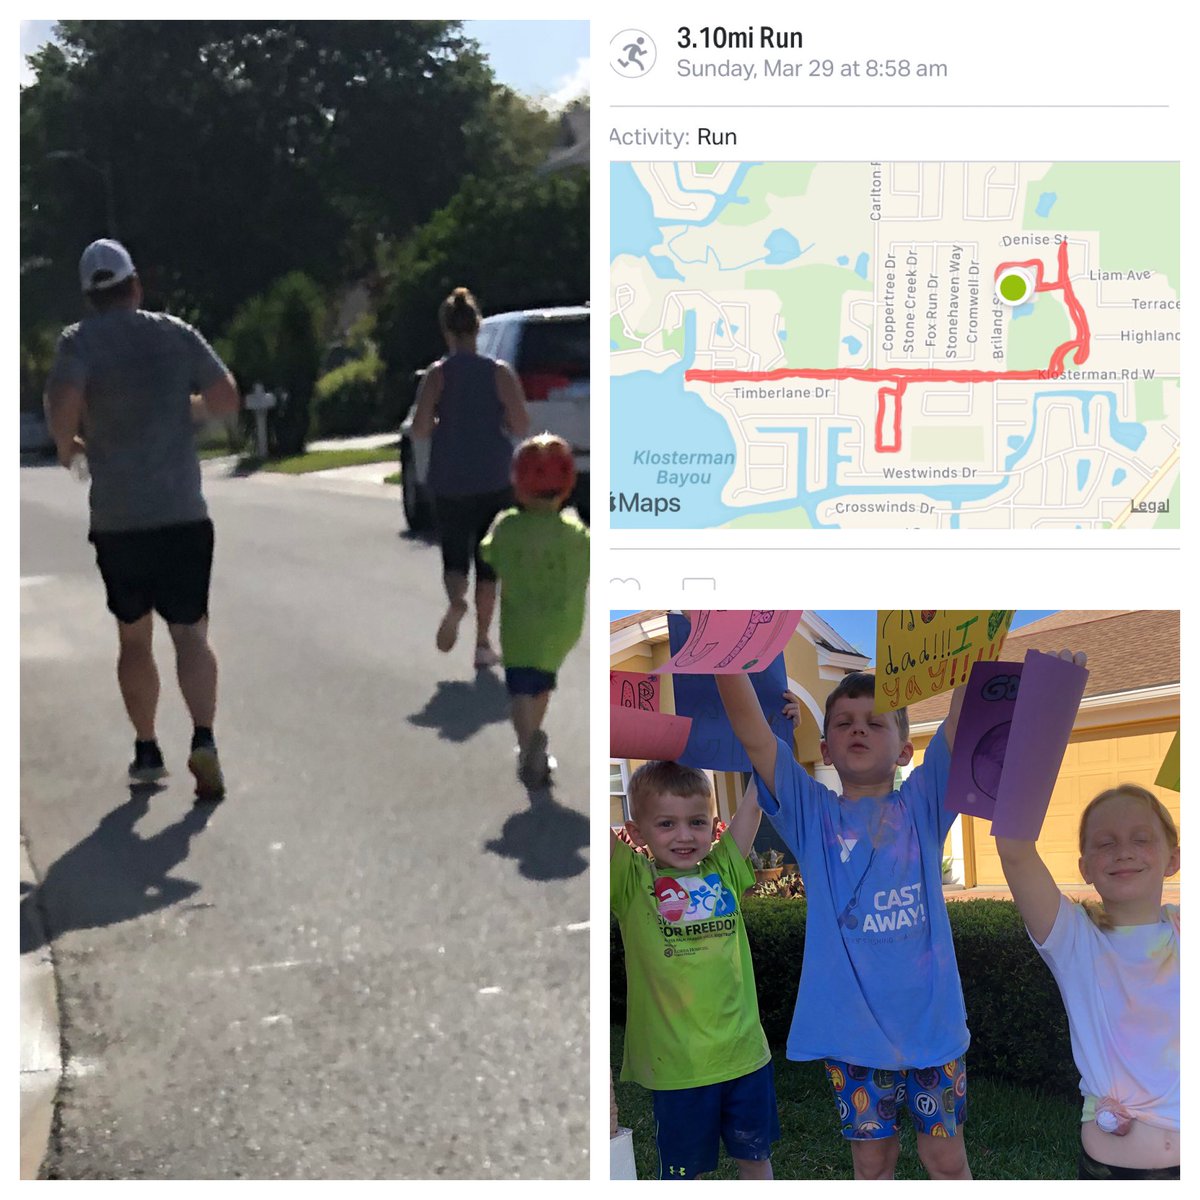 Honored to be a part of the Living Person Community as Melissa and I knocked out our first ever @LetsRockCF Rivers Virtual 5K Rrun this morning. We look forward to many more opportunities to support this cause & to partner with all those who are pursuing the Living Person Spirit.